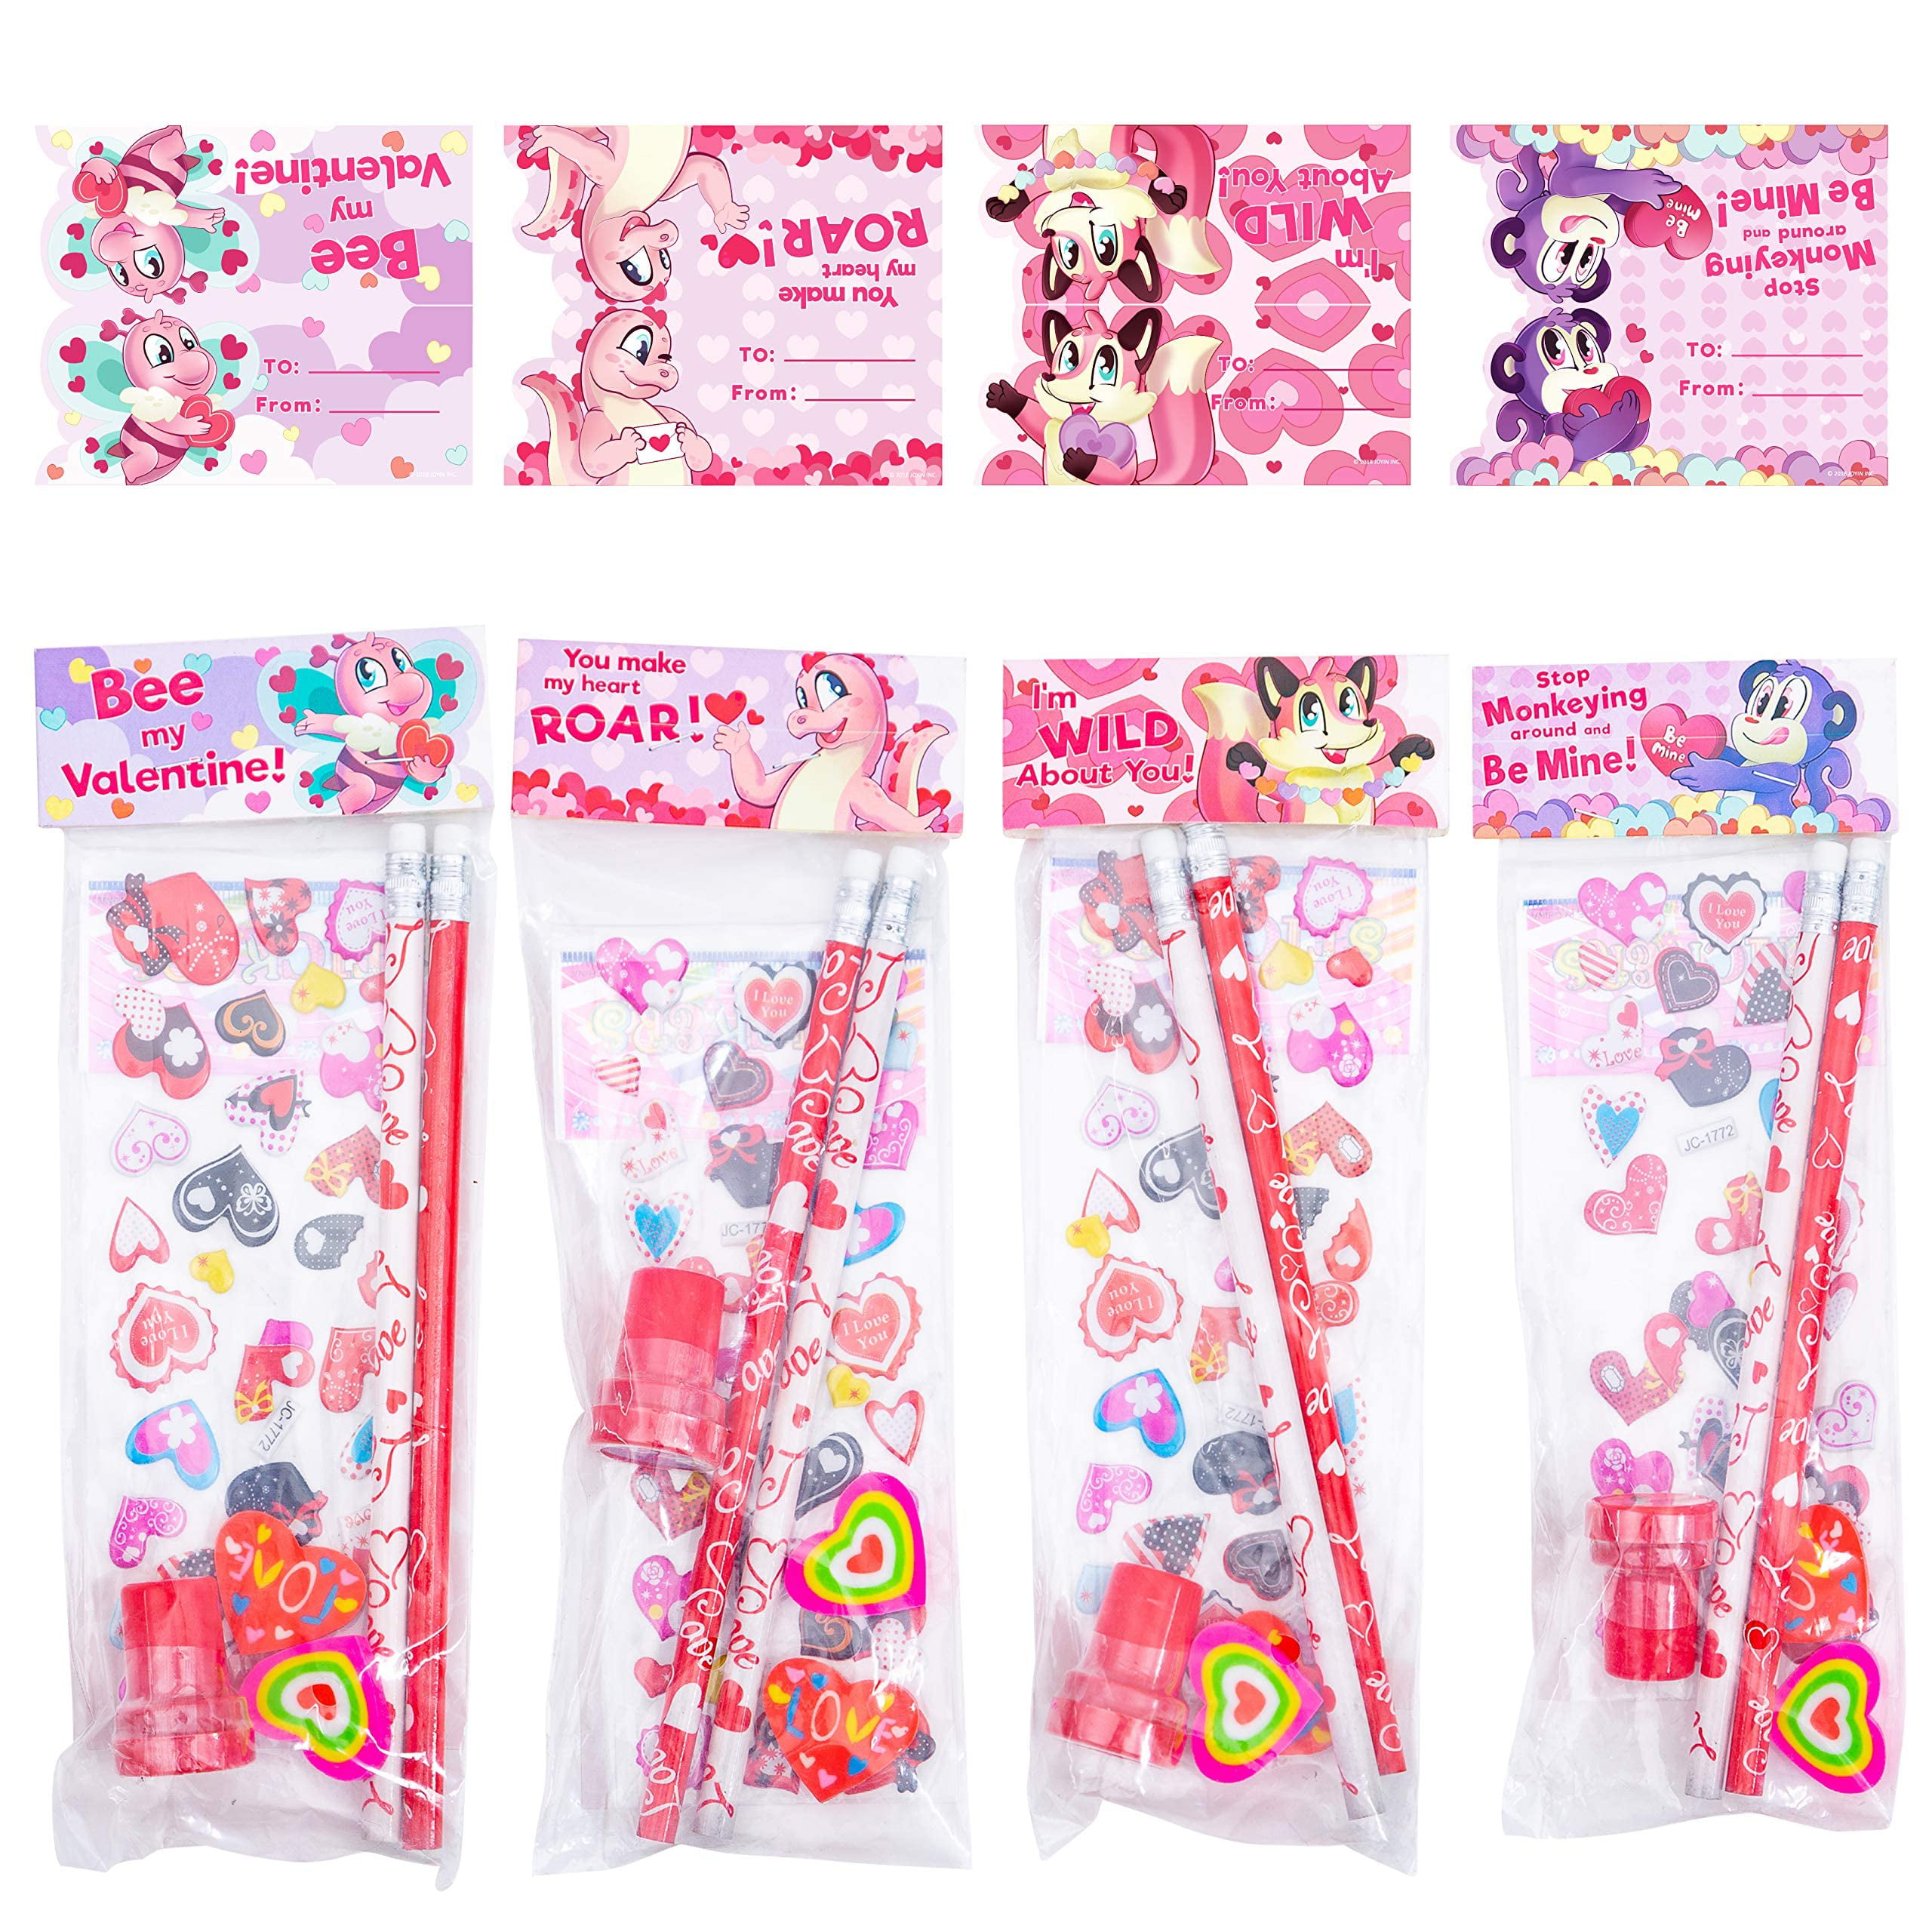 28Pack Valentines Day Gifts for Kids 175 PCS Assorted Stationery Set for  Valentine's School Classroom Exchange Party Favor Goodie Bag